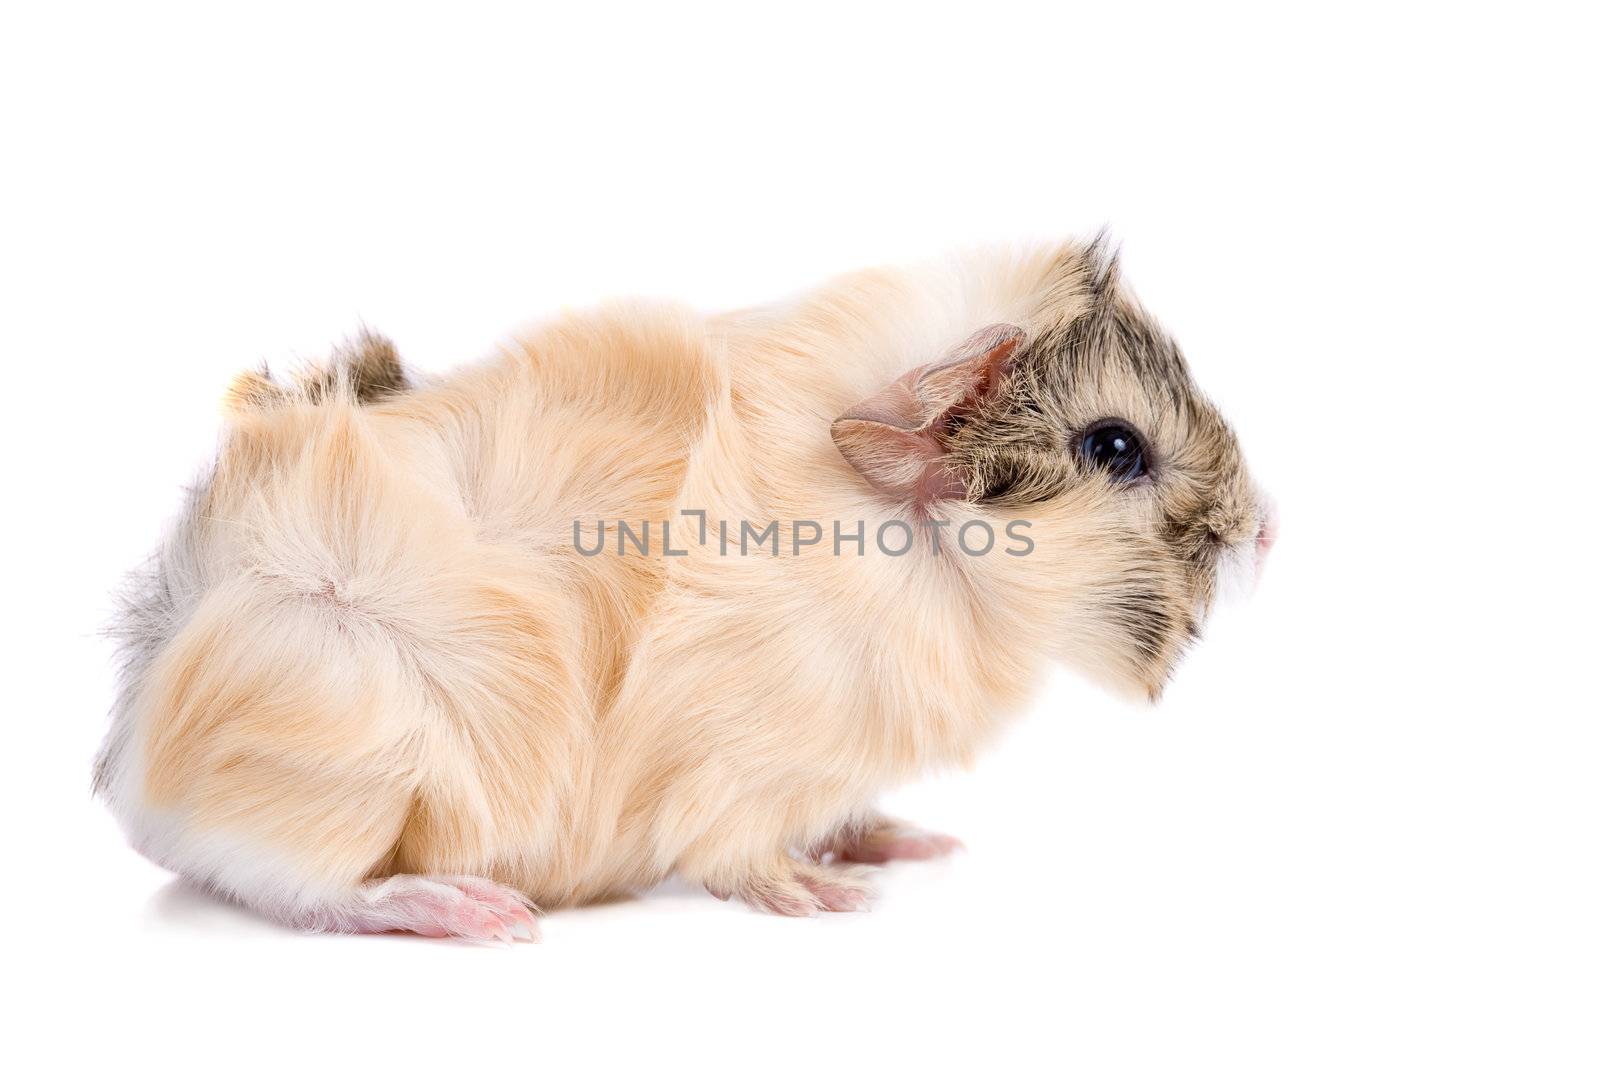 Cute little guinea pig on white background